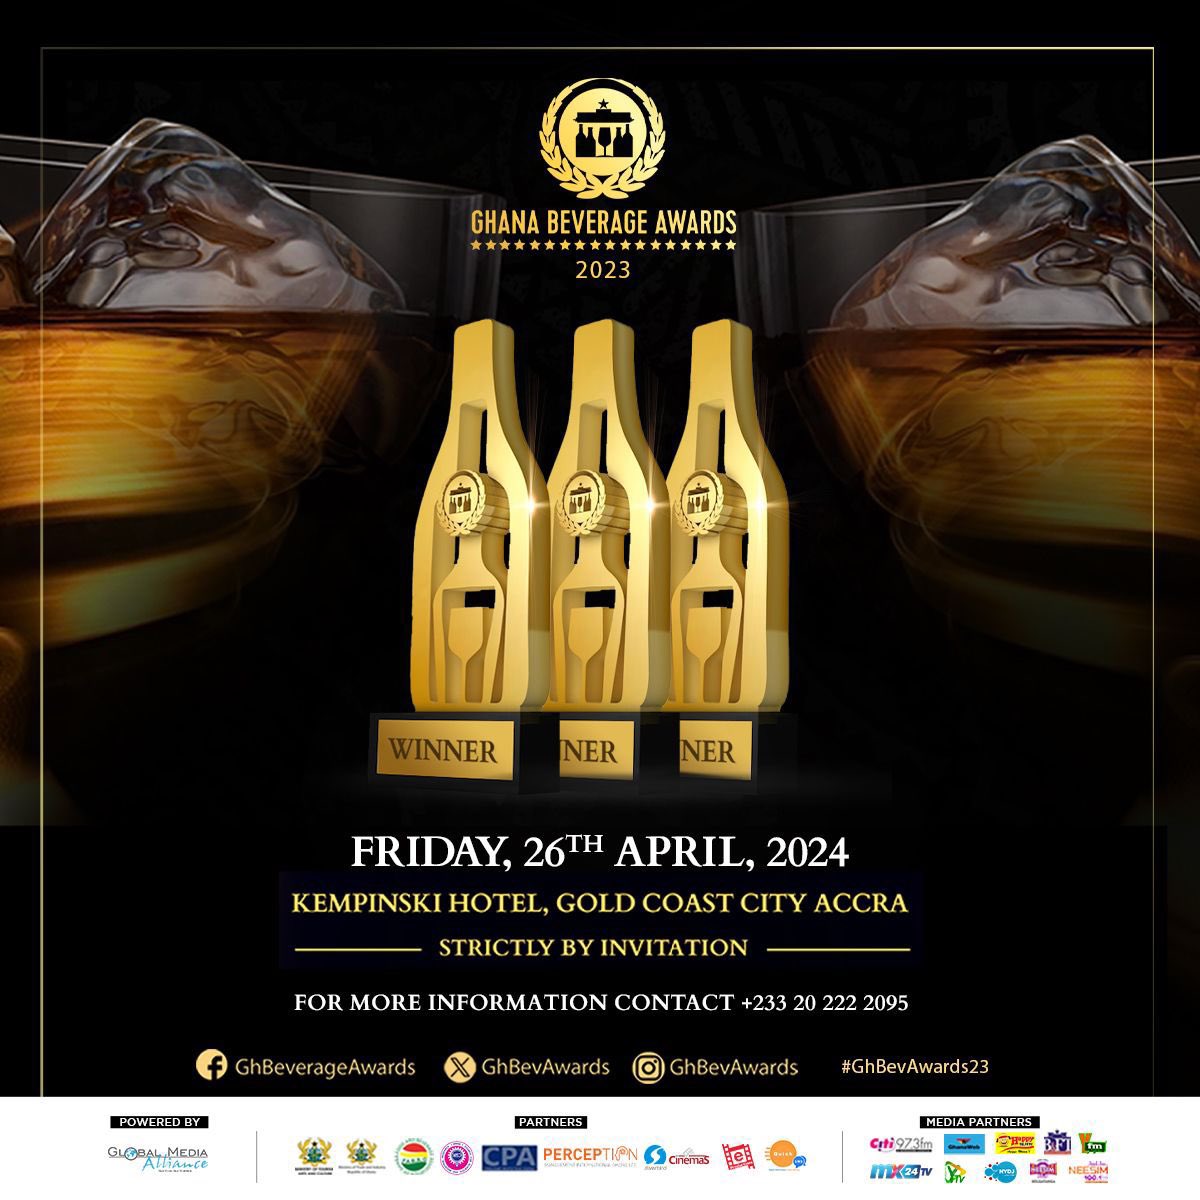 This evening ,  #GhBevAwards23 is happening live at the kempinski hotel Sharo 🔥🔥